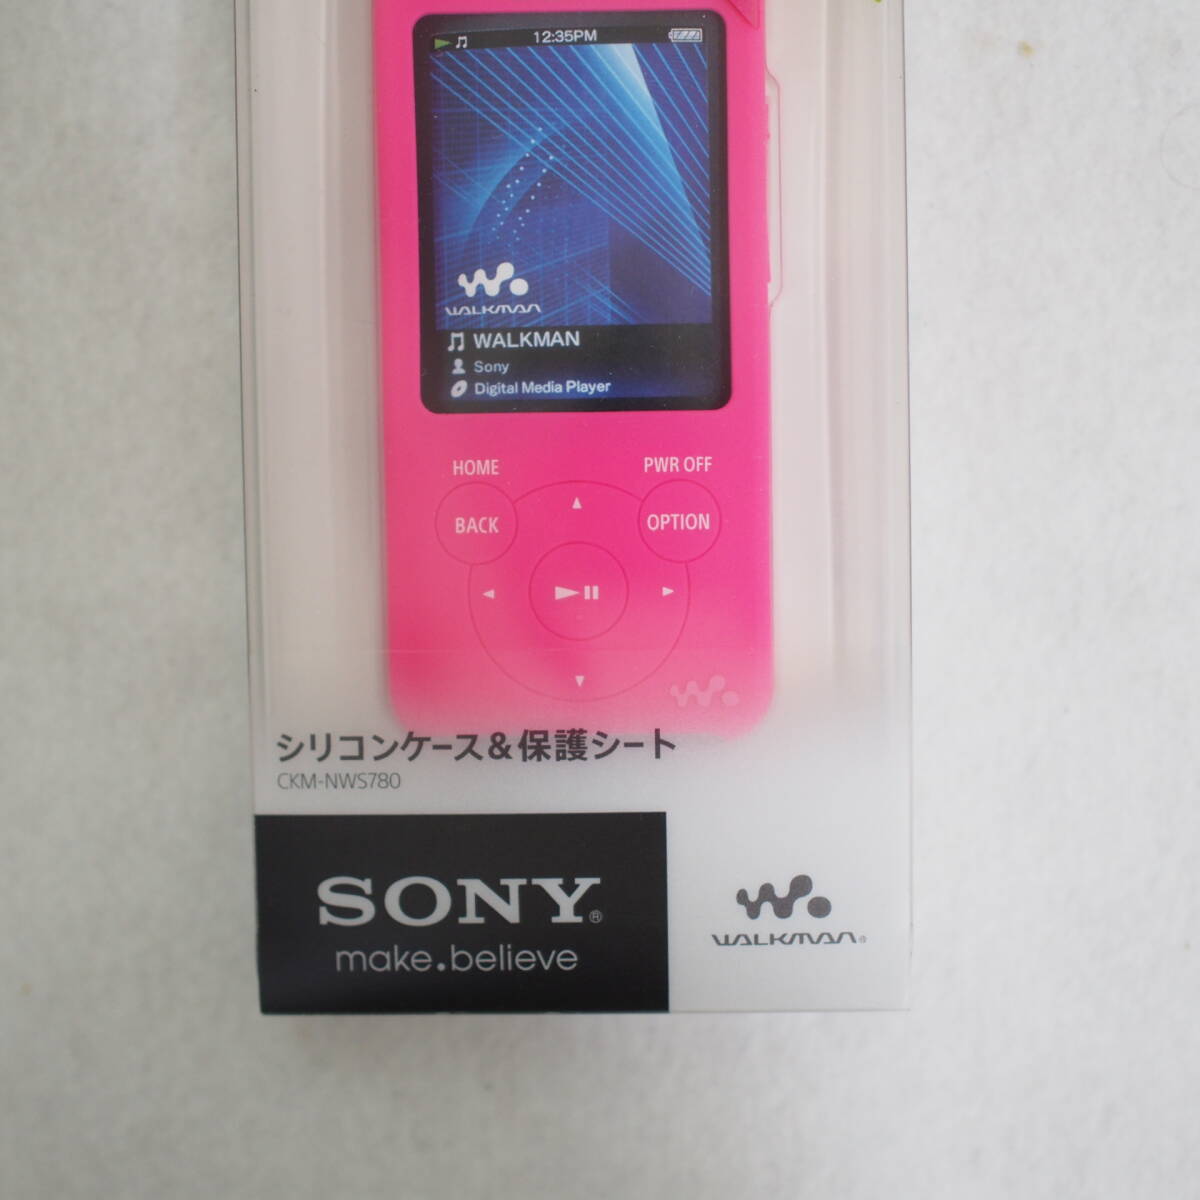 SONY 純正 ソニー シリコンケース 保護シート ビビットピンク VIivid Pink CKM-NWS780 PM/S NW-S780K/E NW-E0080 K 管理番号475-5-2の画像5